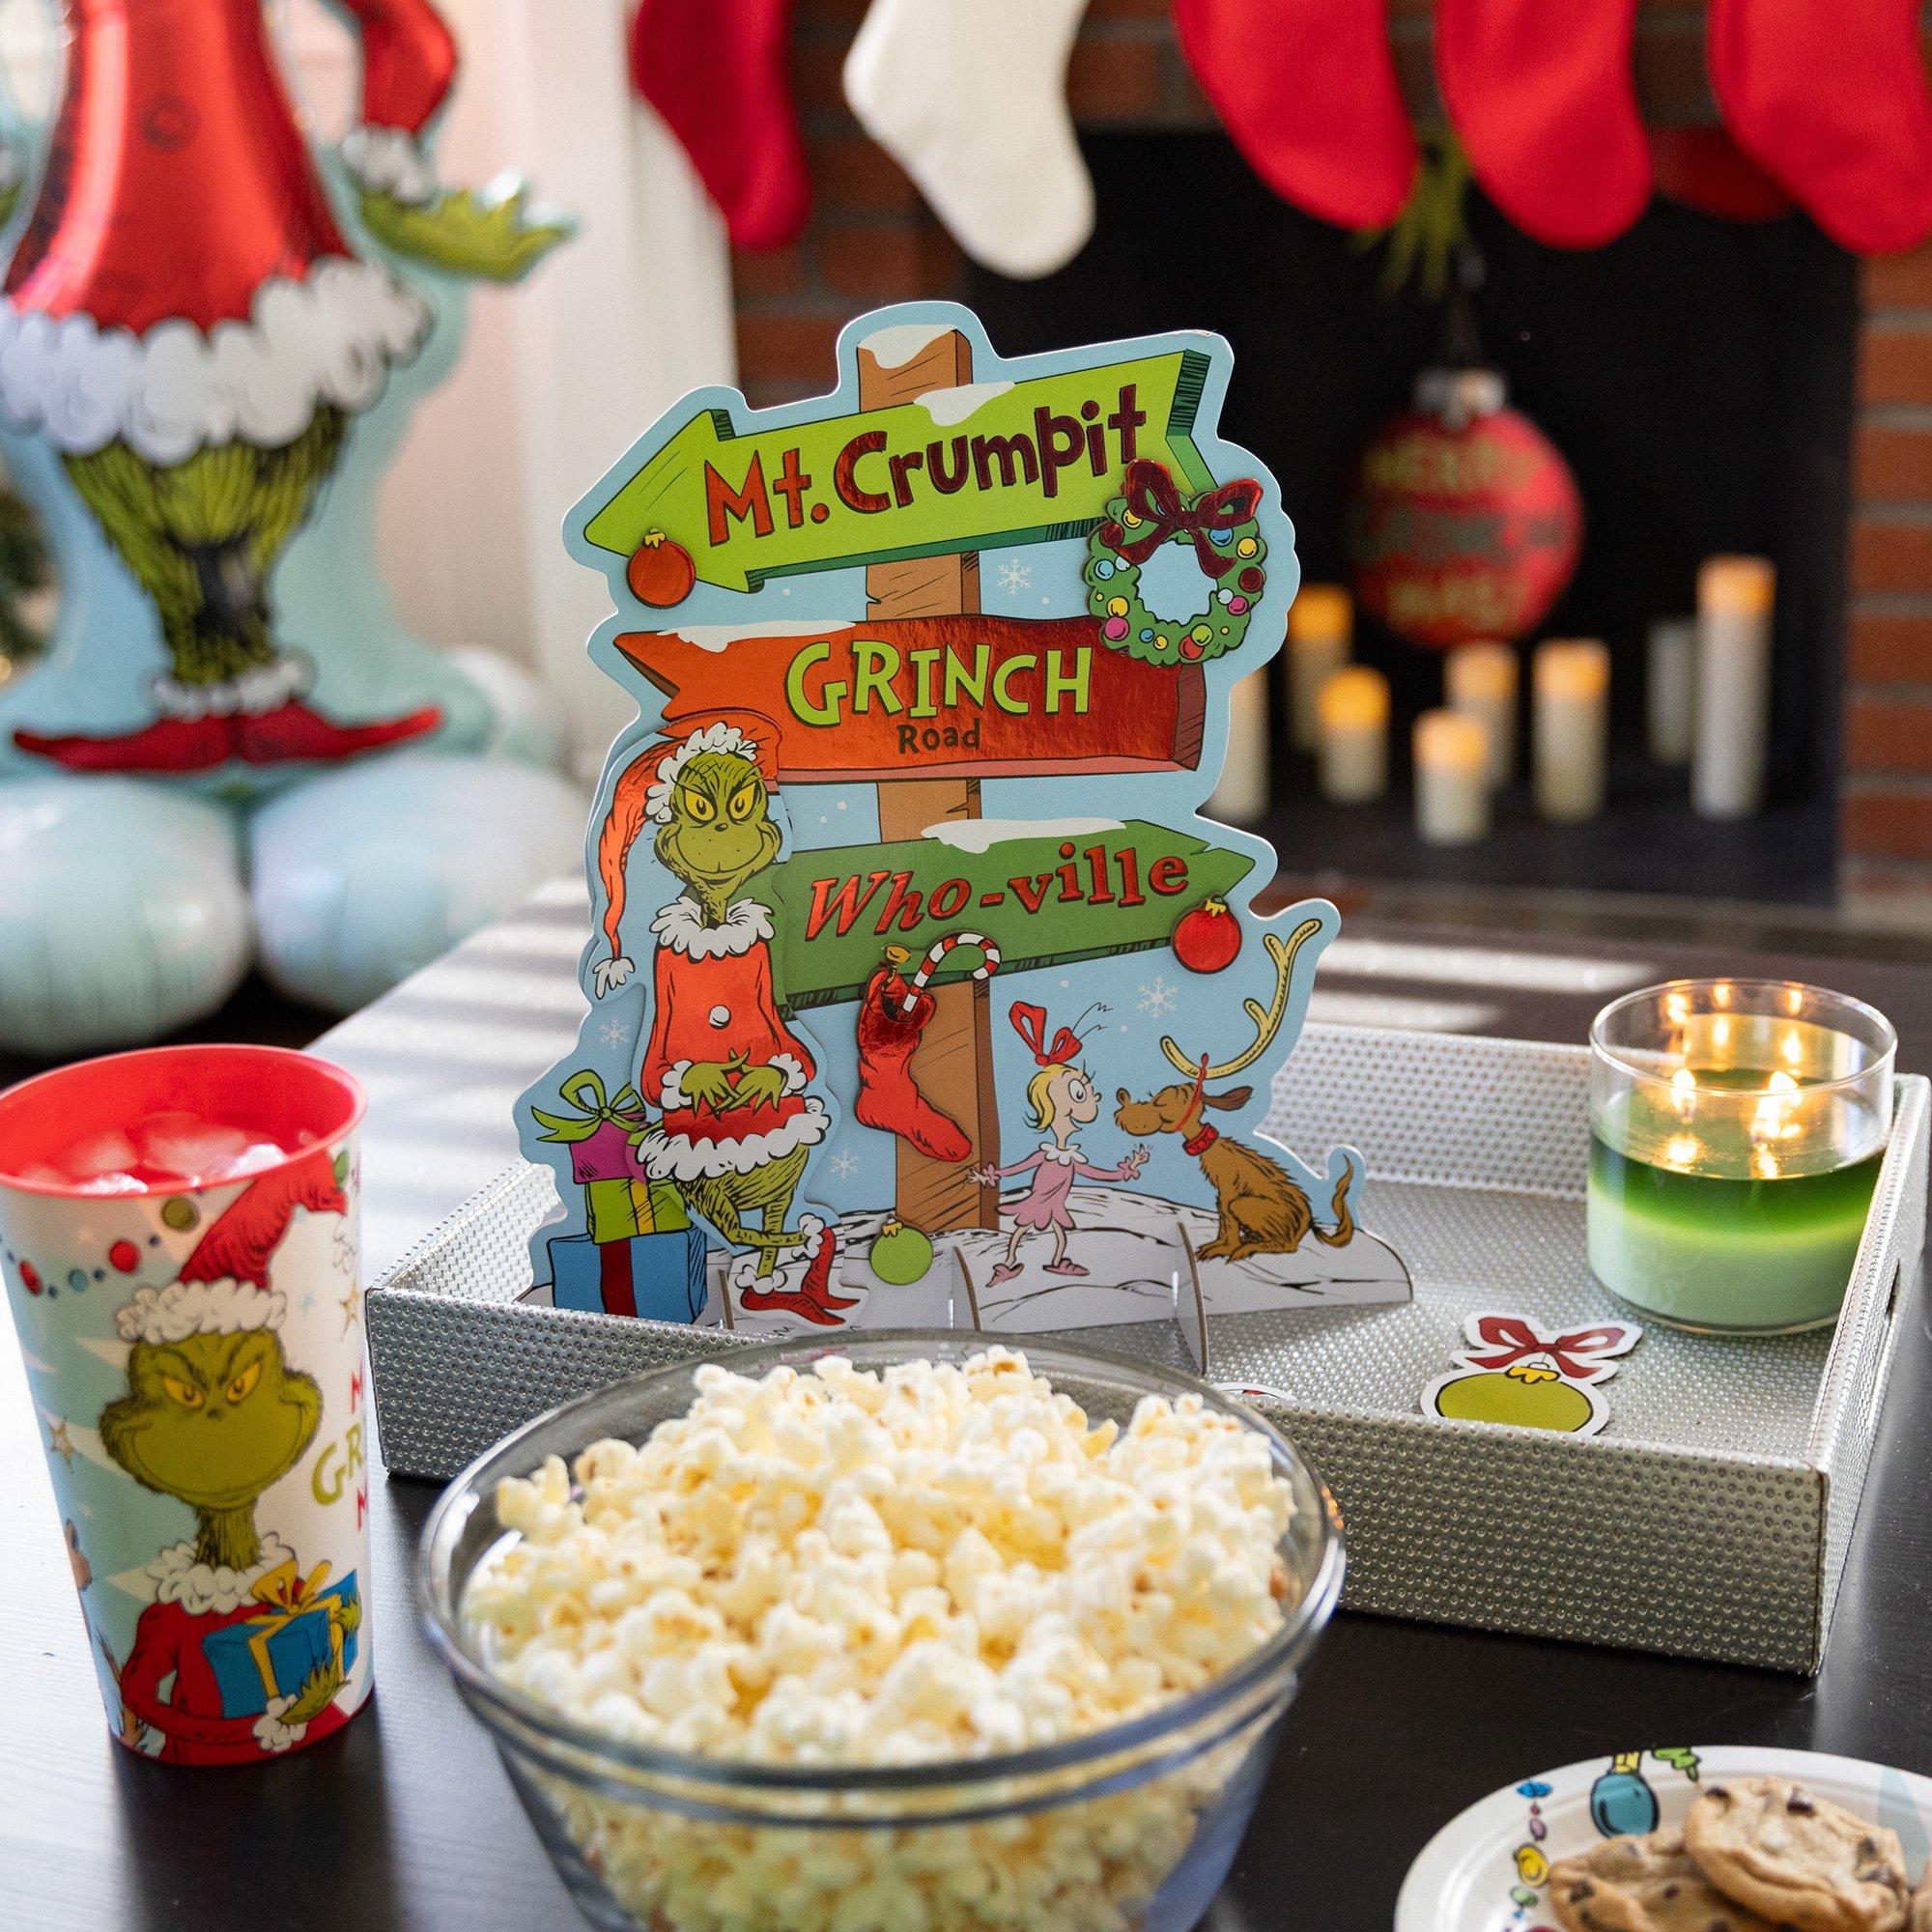 The Grinch Dr. Seuss Popcorn Maker, New in Box.